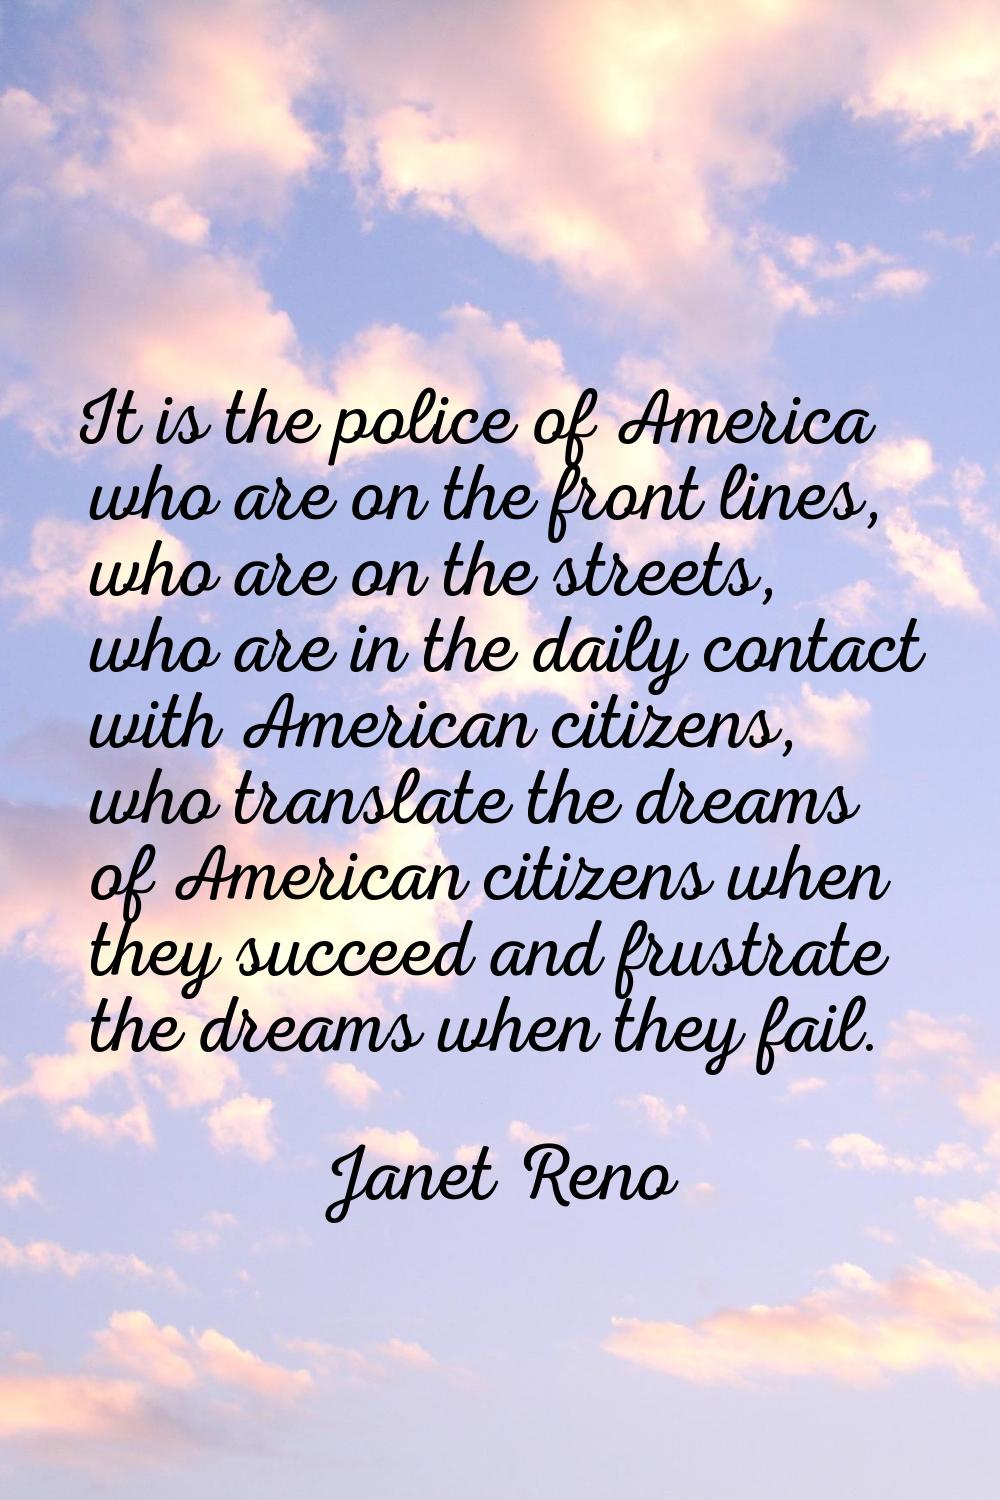 It is the police of America who are on the front lines, who are on the streets, who are in the dail